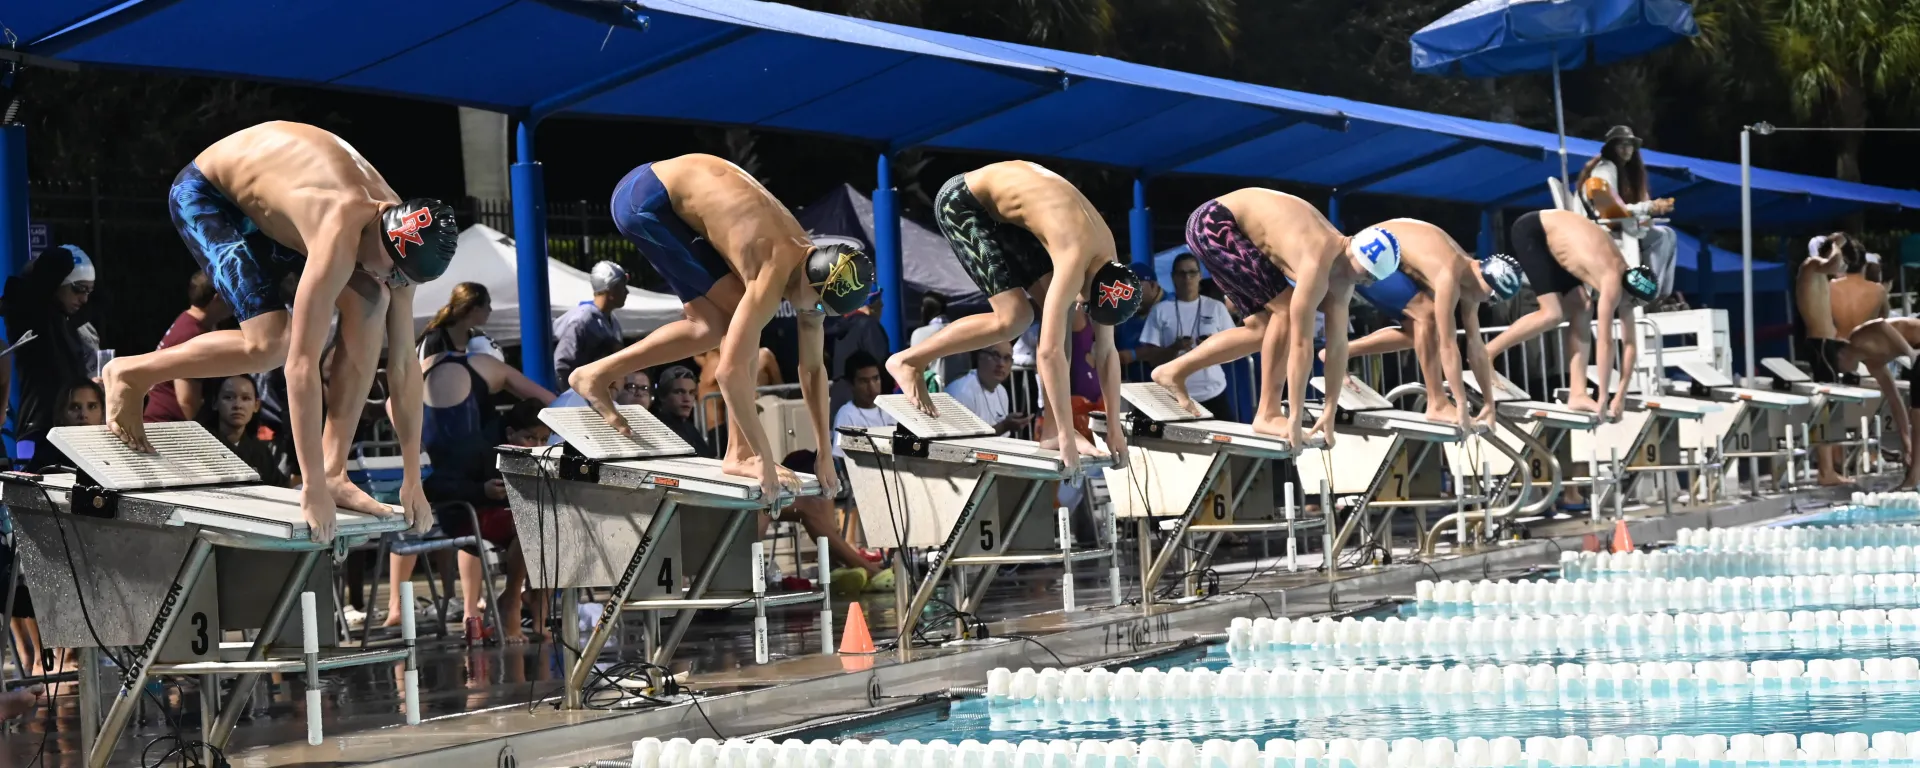 Image of swimmers competing at Sailfish Splash Waterpark